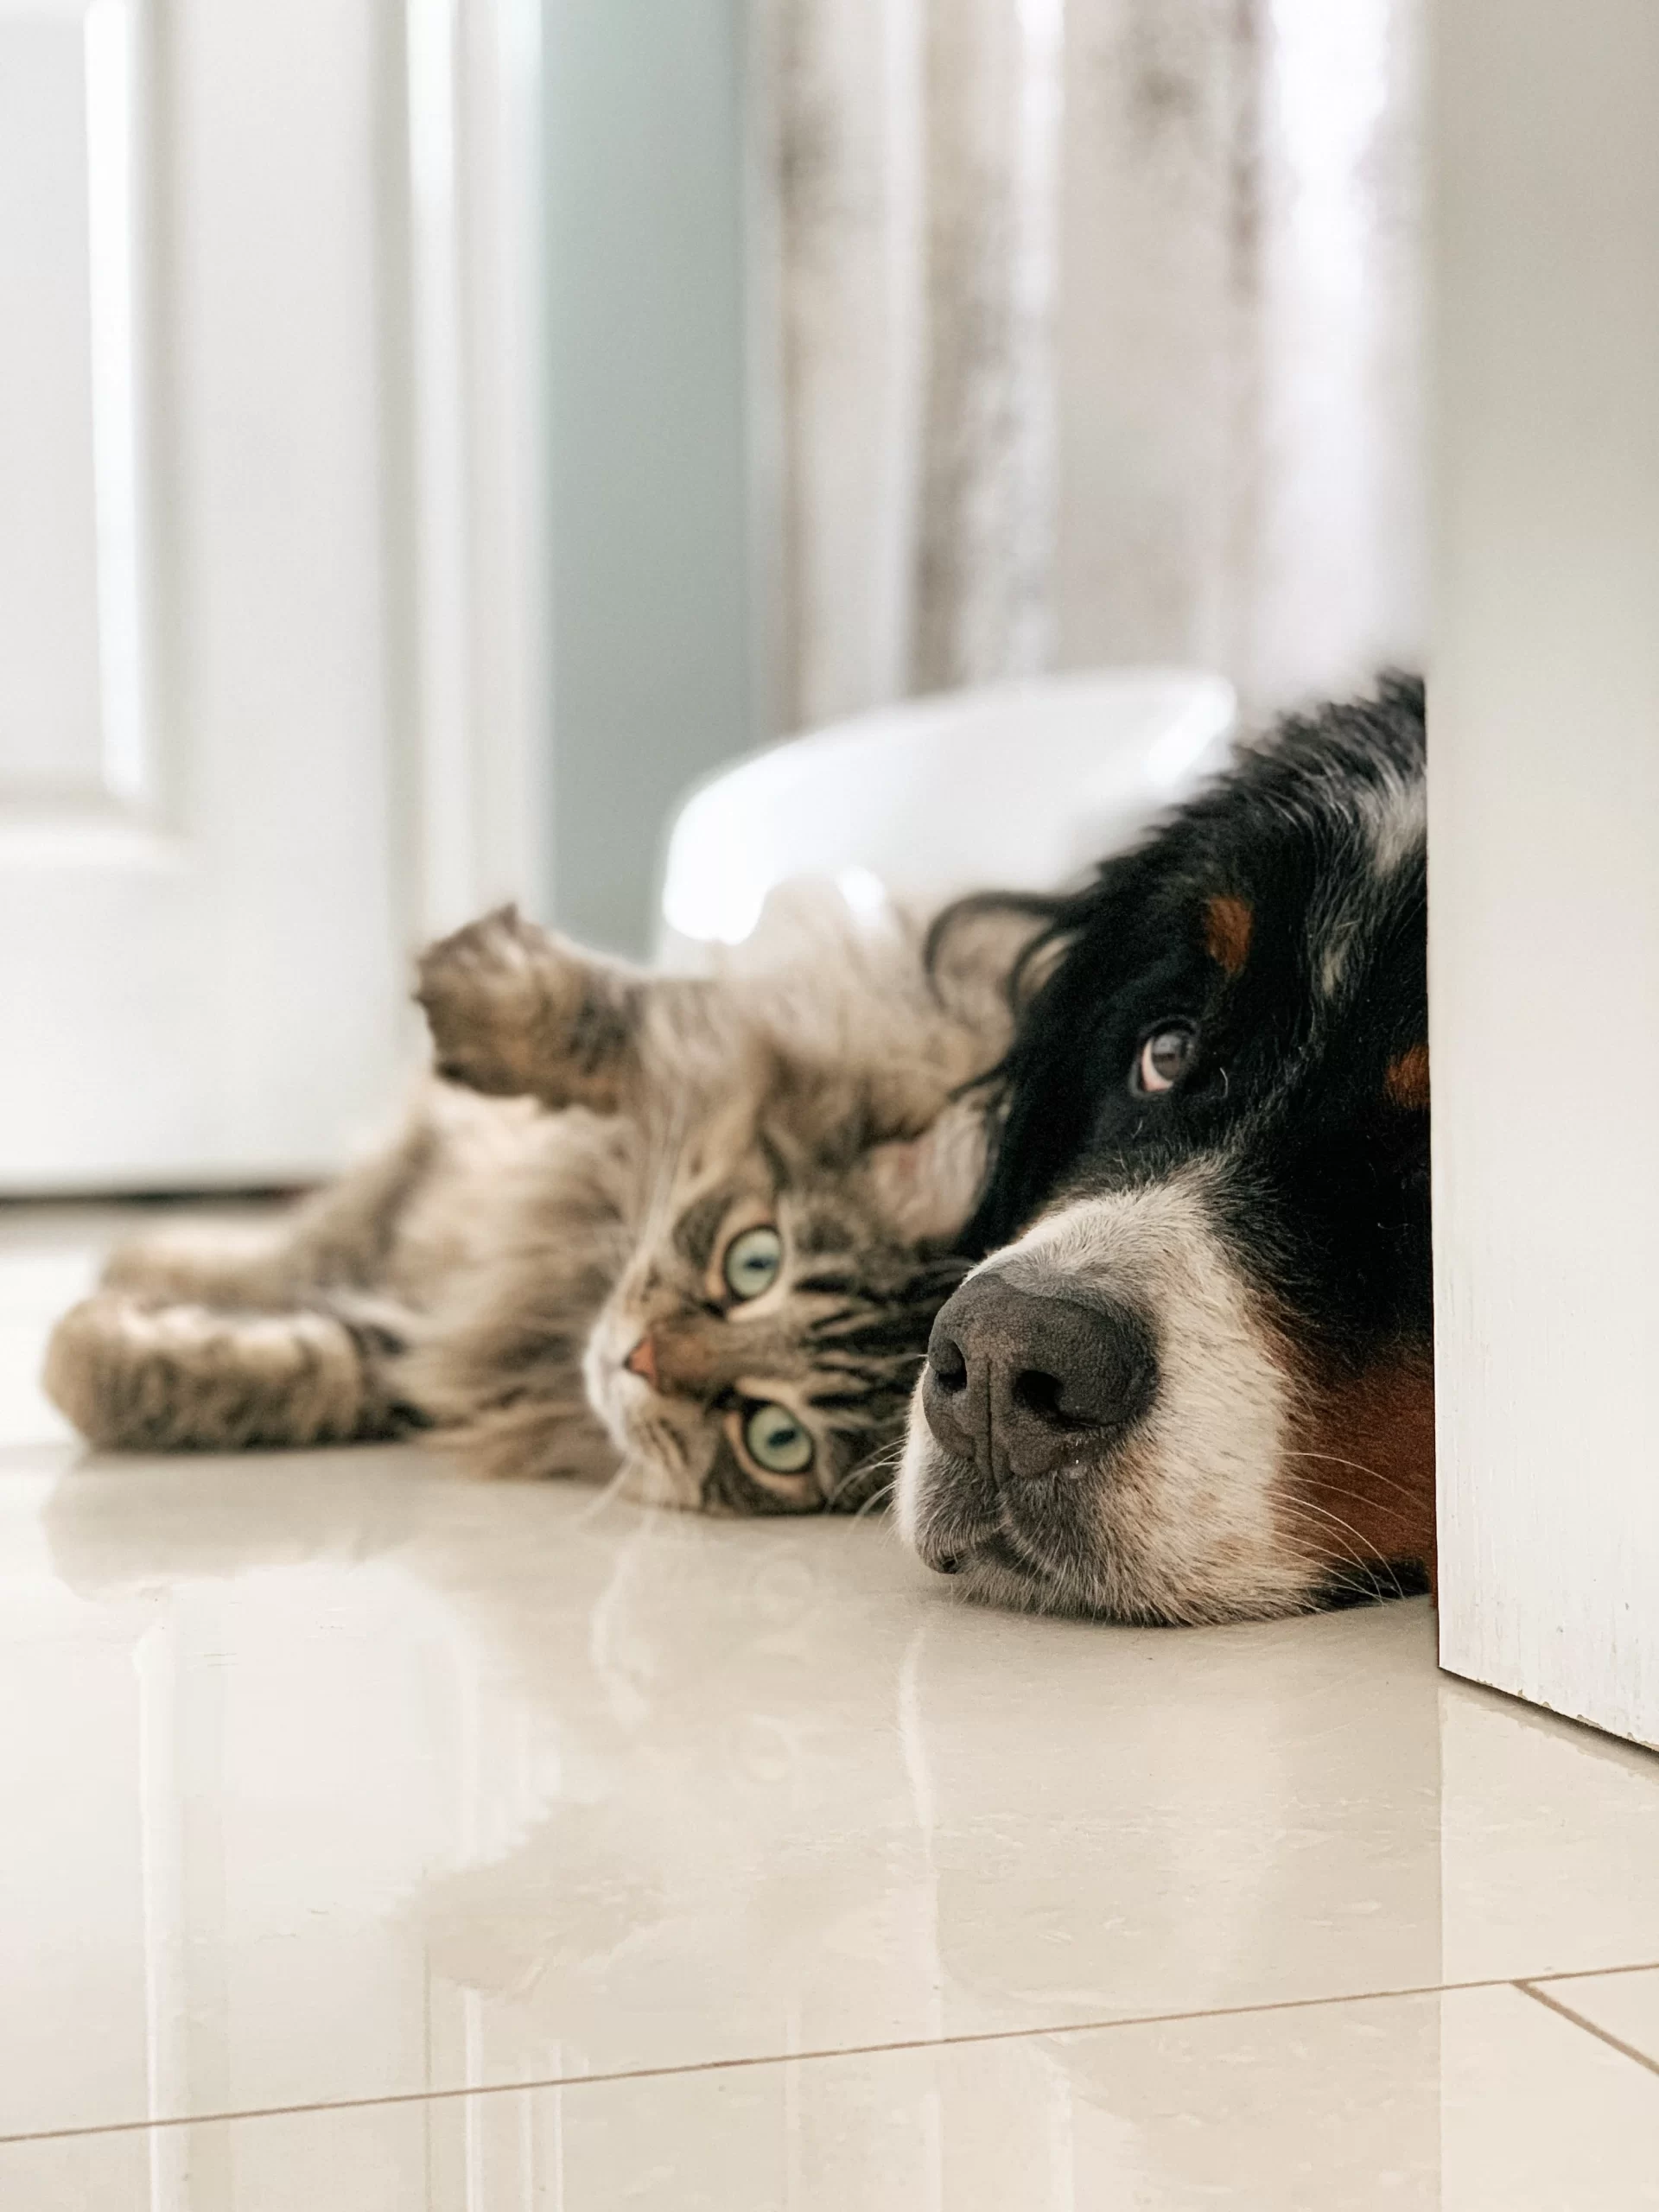 louis-philippe-poitras-dog and cat at the edge of a open door -unsplash.webp